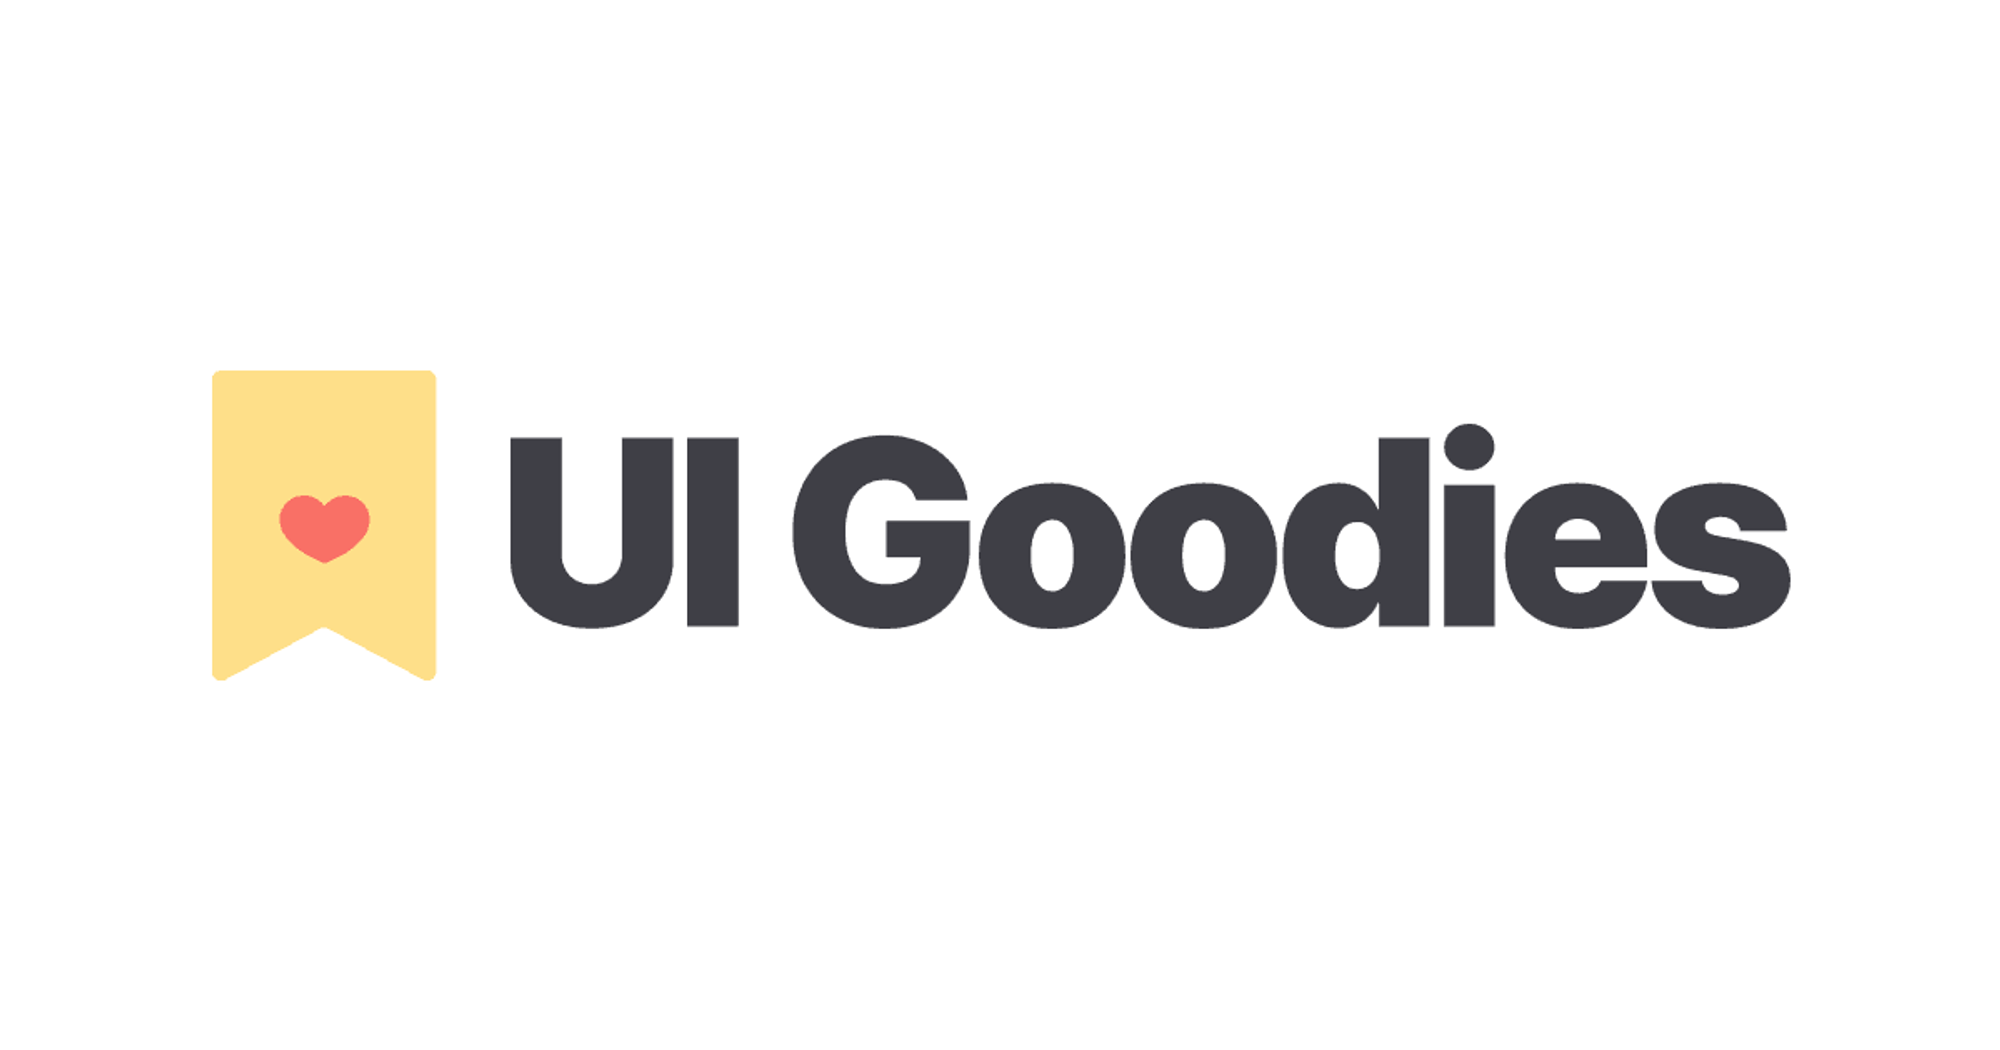 UI Goodies - A Directory of Design Resources & Tools